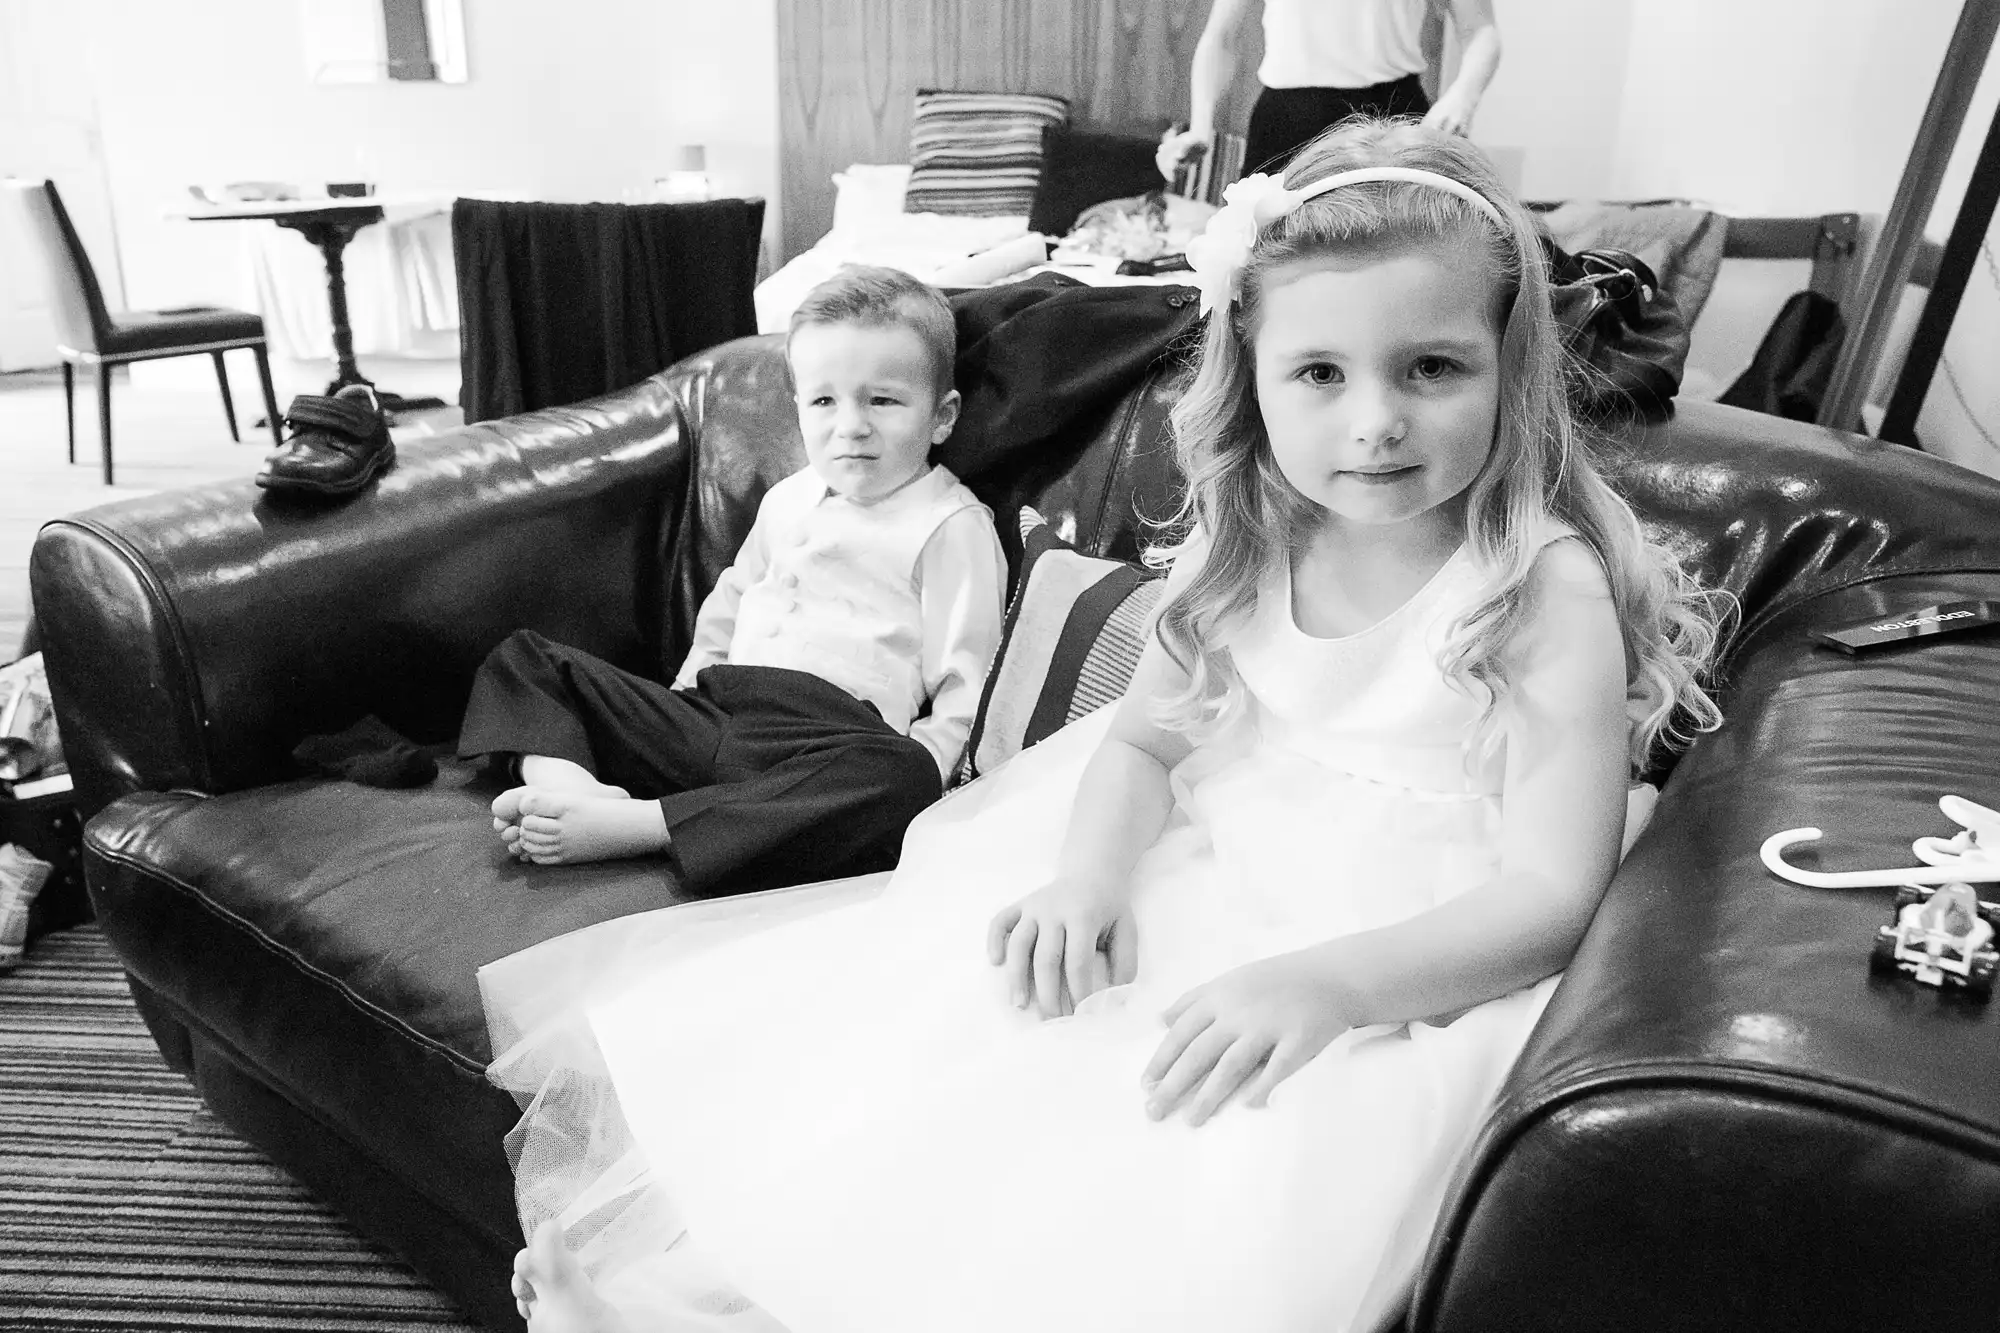 A young girl in a white dress and a young boy in a white shirt and black pants, sitting on a black leather couch, looking at the camera.